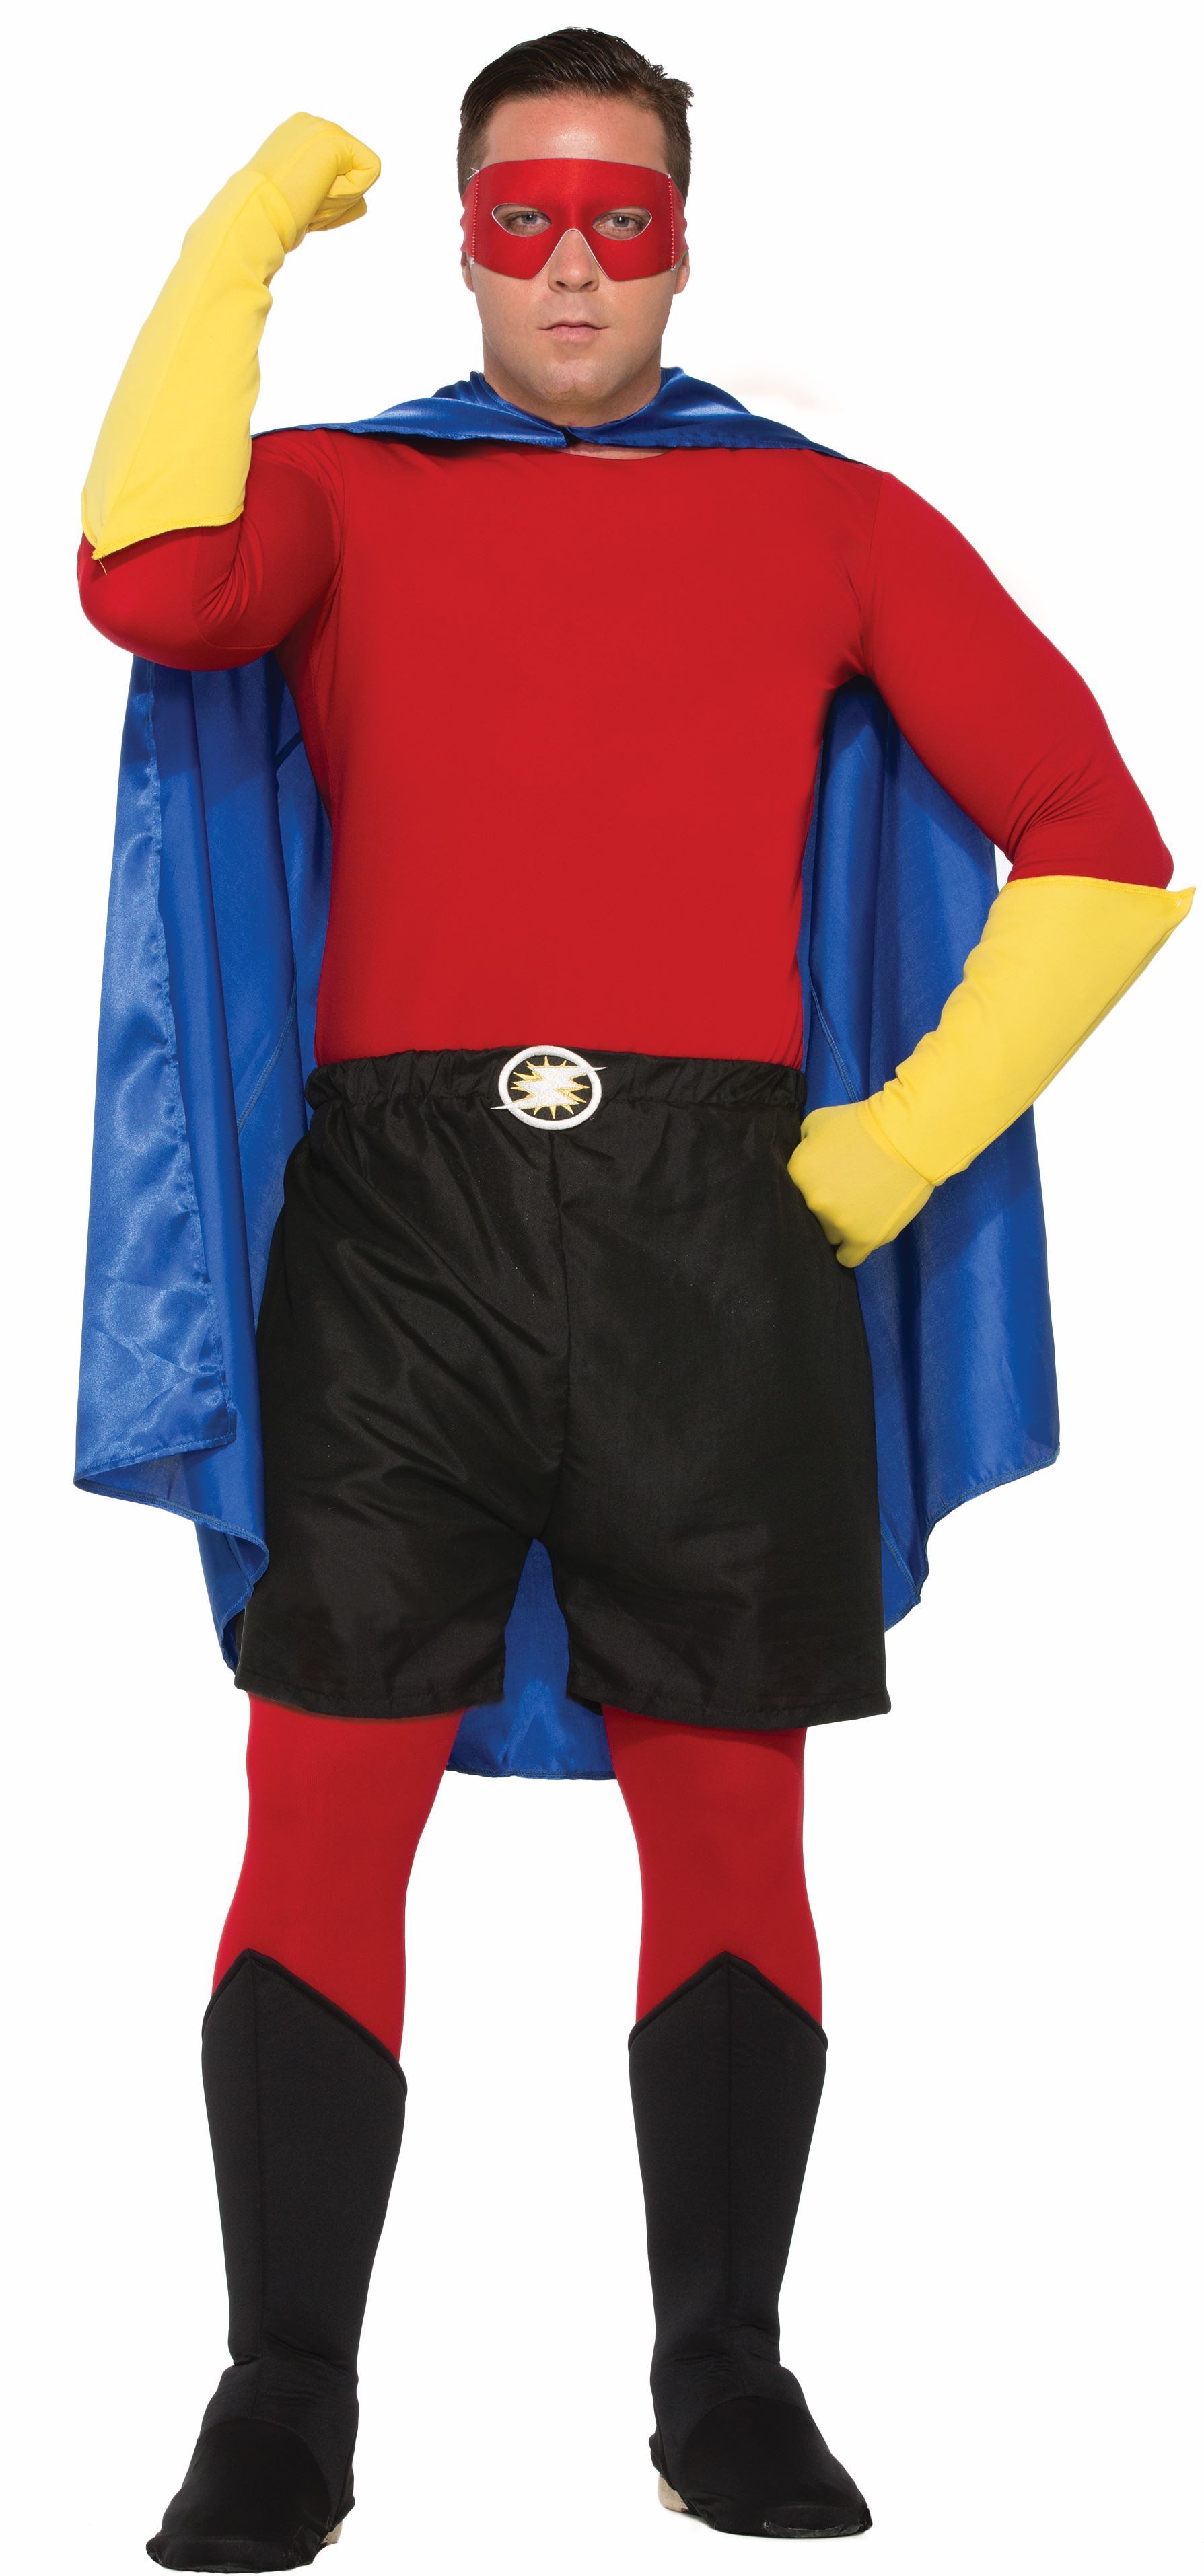 Adult Superman DIY Costume Accessory Red Shirt | $9.99 | The Costume Land